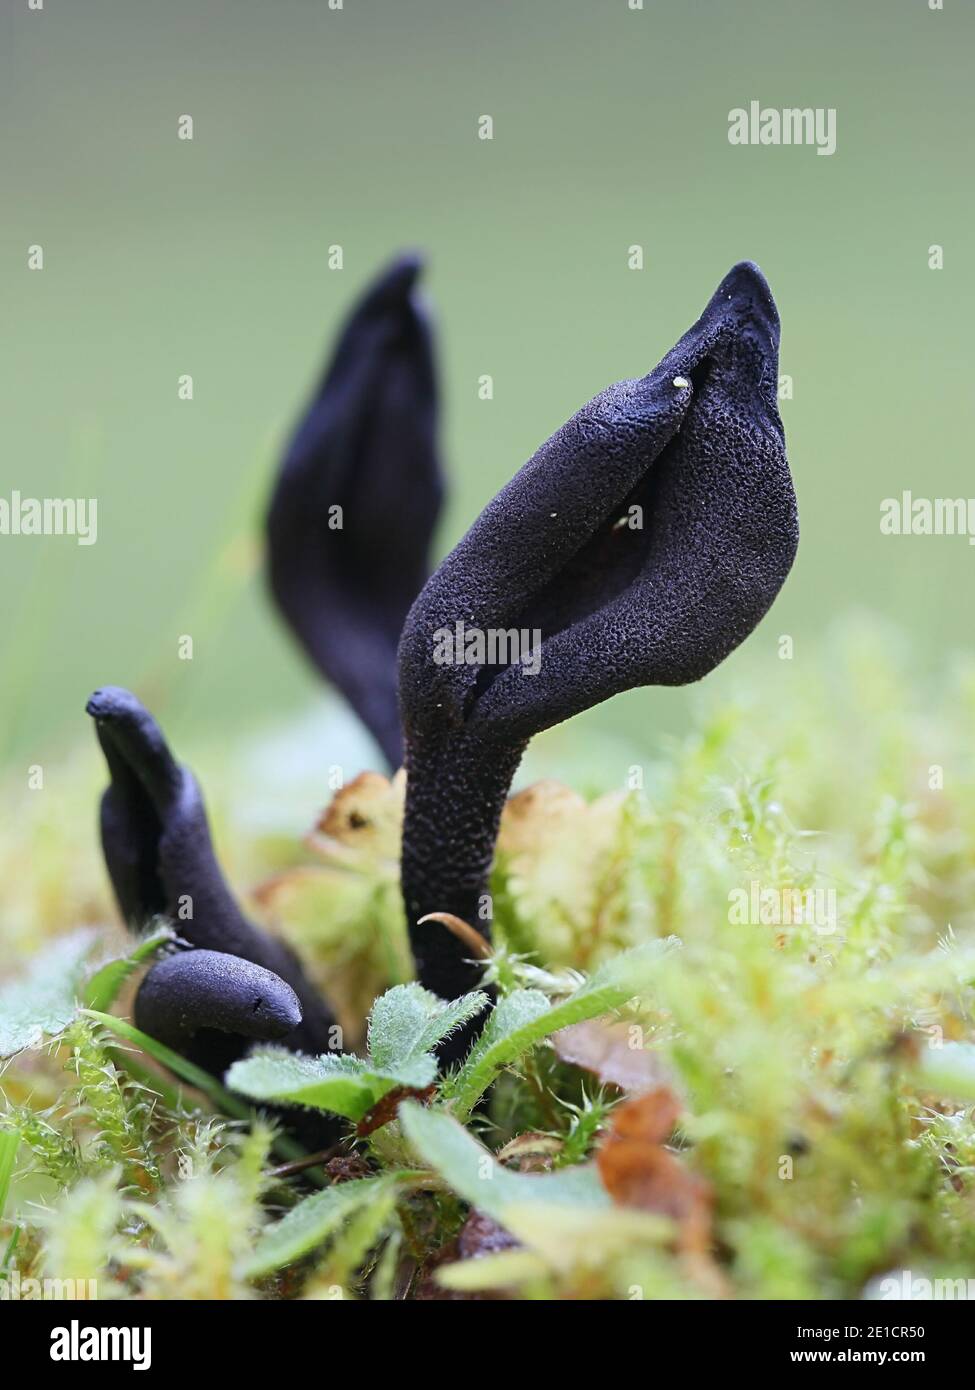 Geoglossum fallax, commonly known as Deceptive Earthtongue, wild fungus from Finland Stock Photo